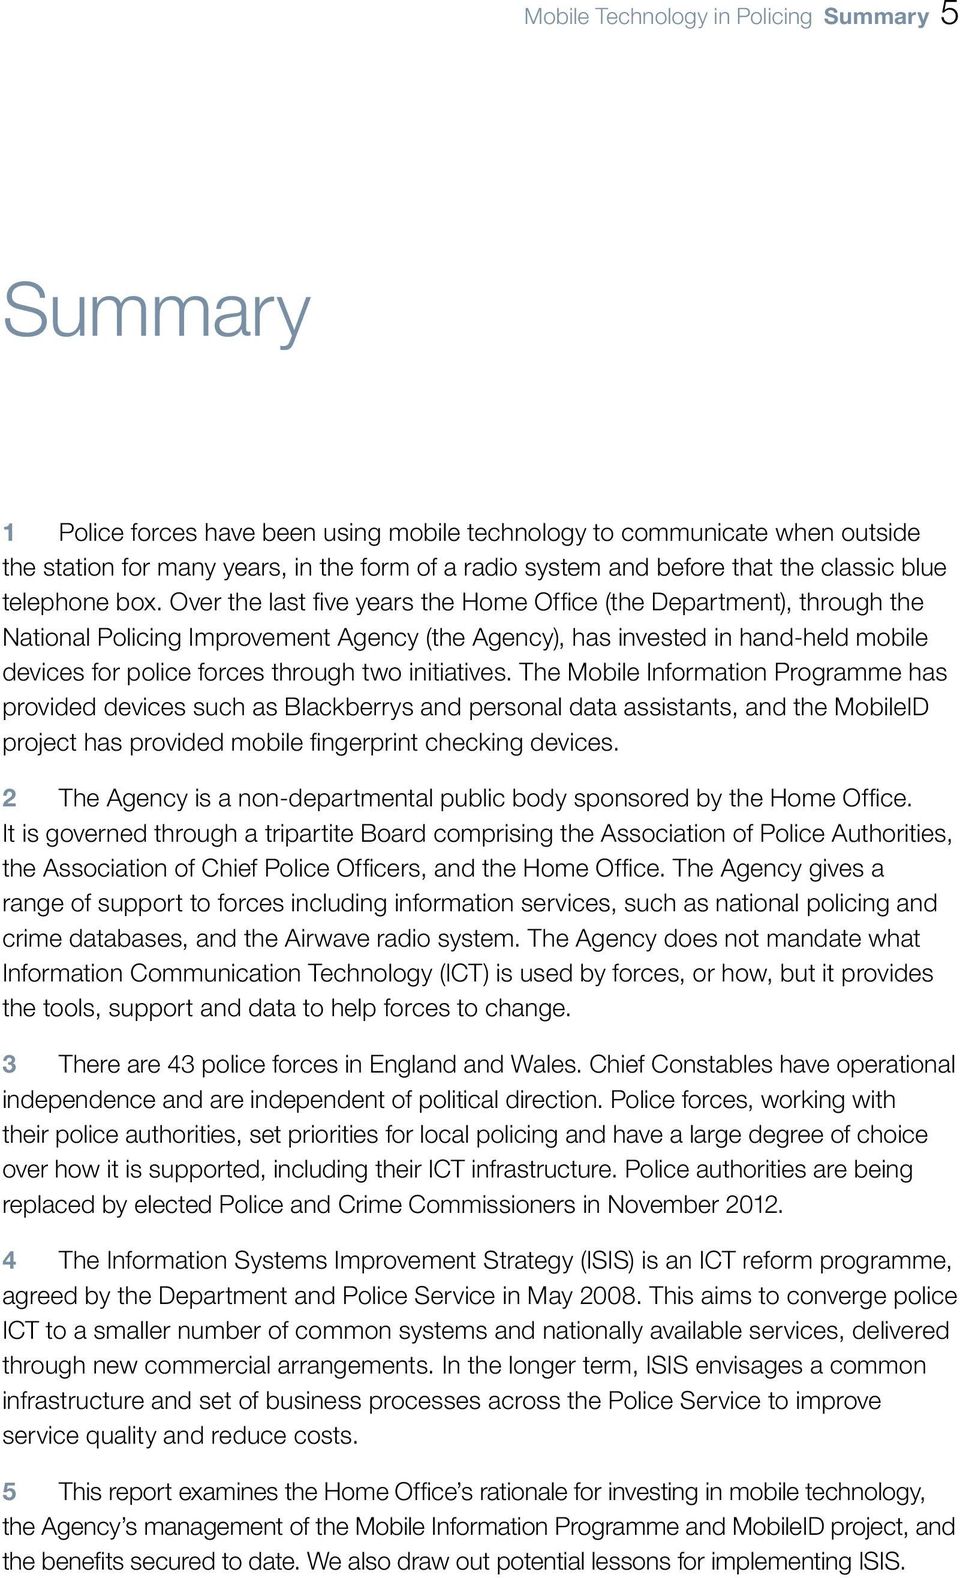 Over the last five years the Home Office (the Department), through the National Policing Improvement Agency (the Agency), has invested in hand-held mobile devices for police forces through two